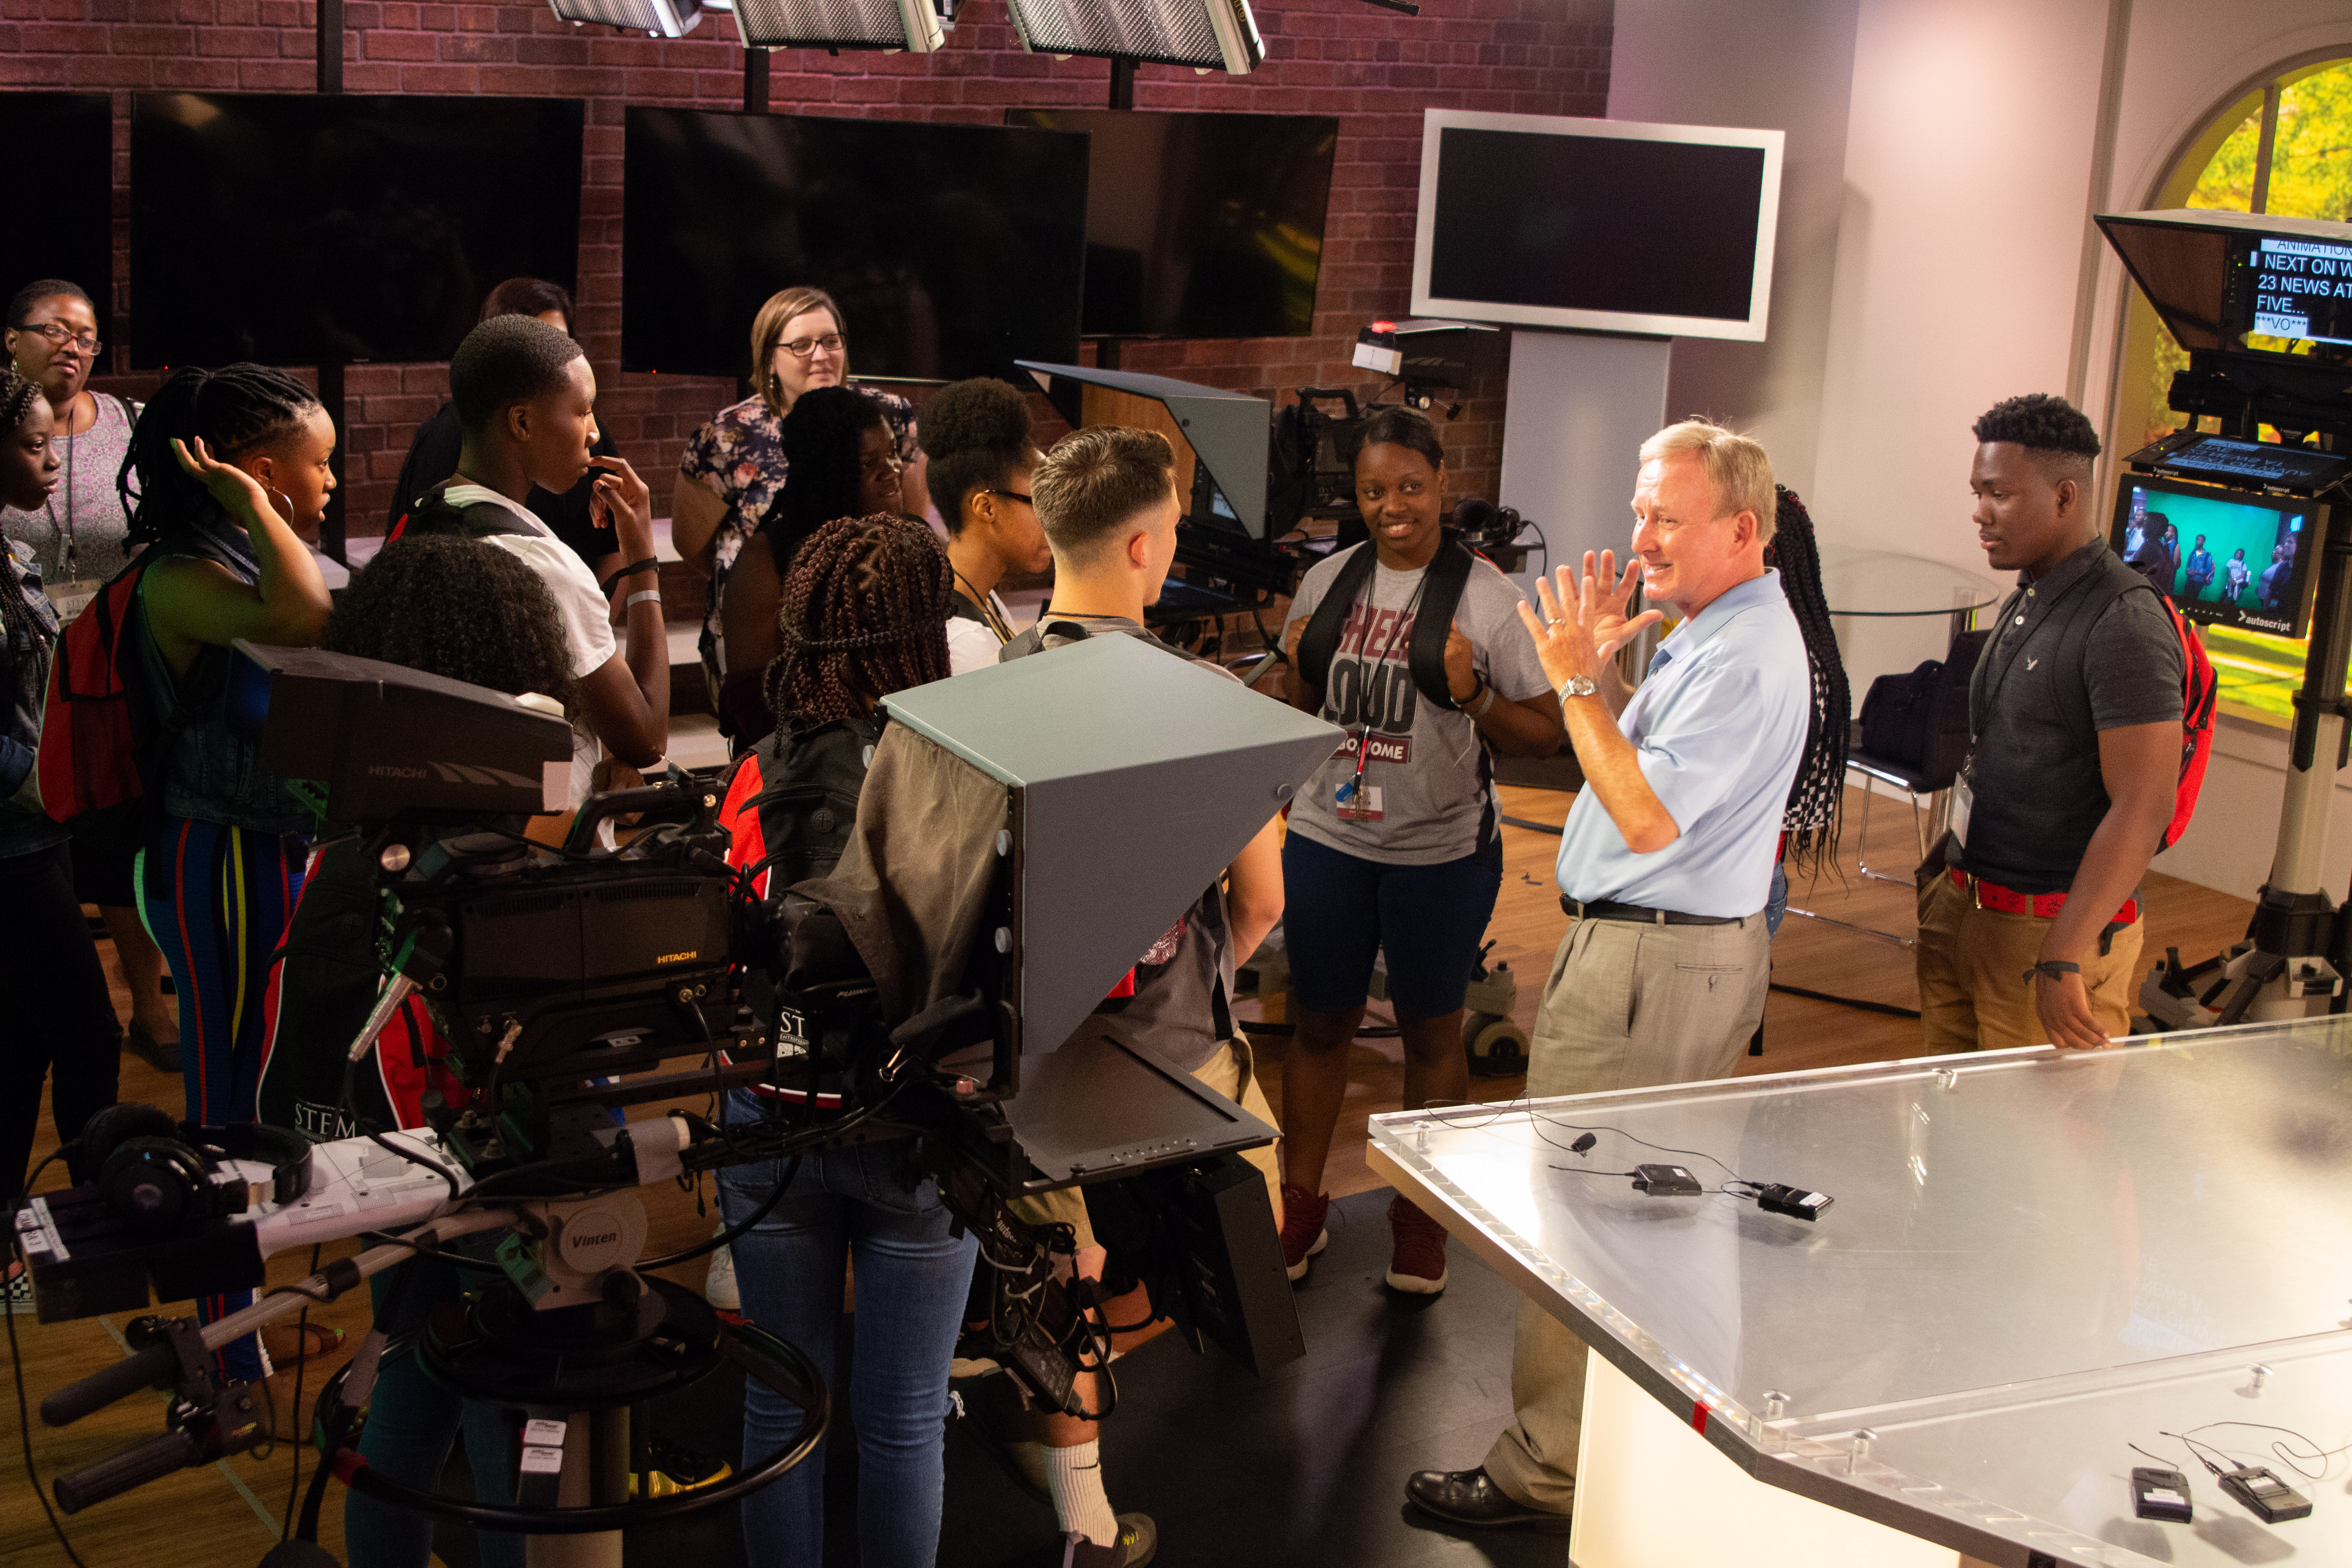 STEM Academy participants tour the WVUA studio and meet longtime newscaster Mike Royer, who now serves as managing editor at the studio, where he shares a lifetime of broadcast journalism experience and encouragement with students.